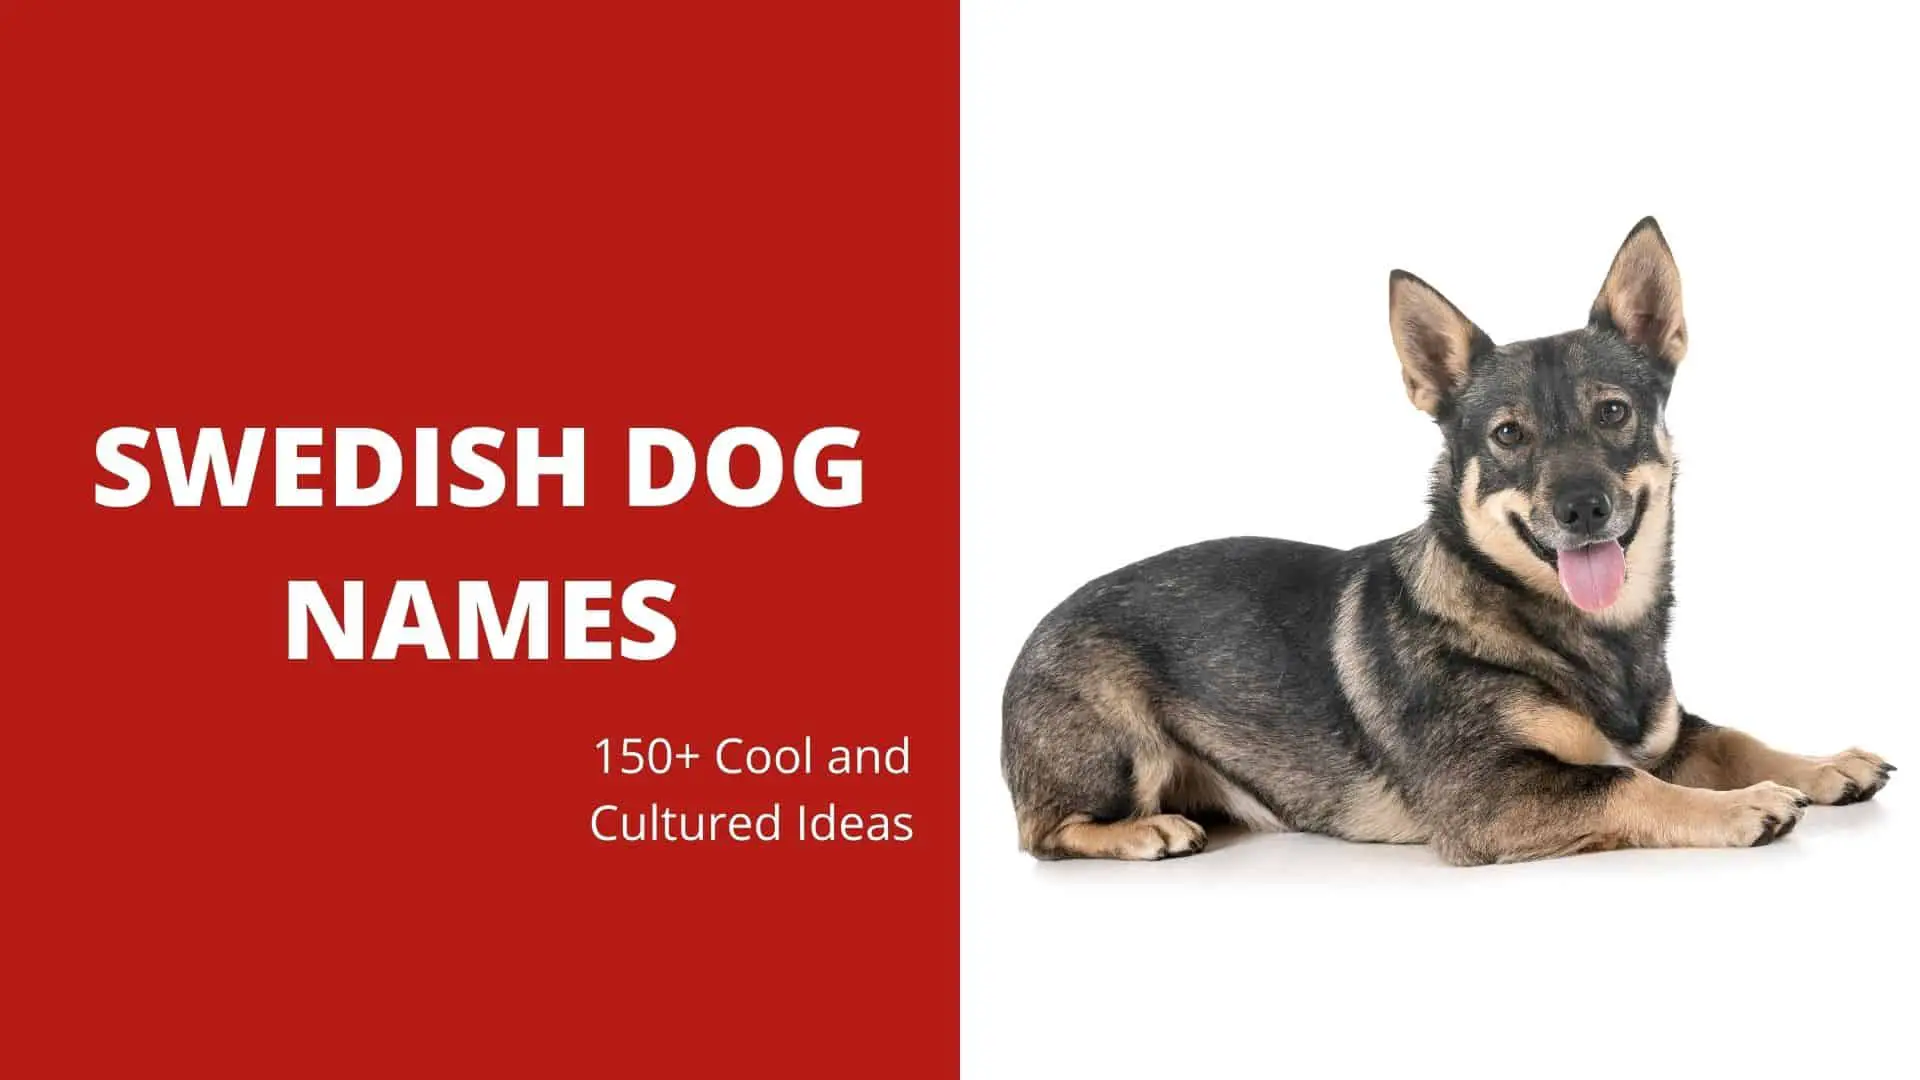 Swedish Dog Names – 150+ Cool and Cultured Ideas